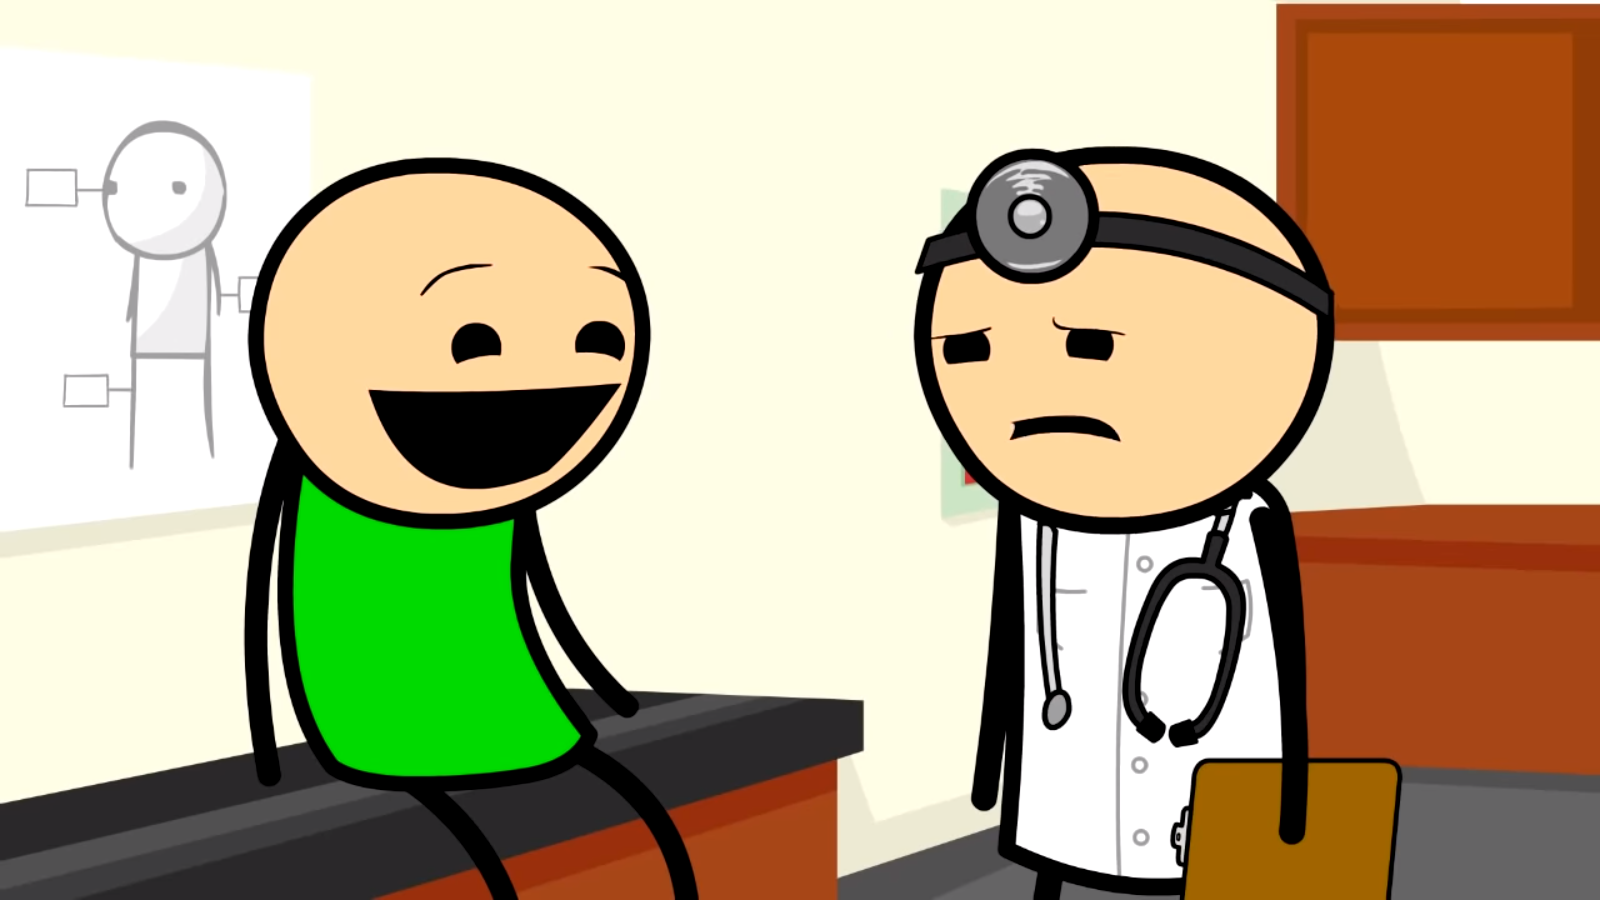 Cyanide and happiness ass